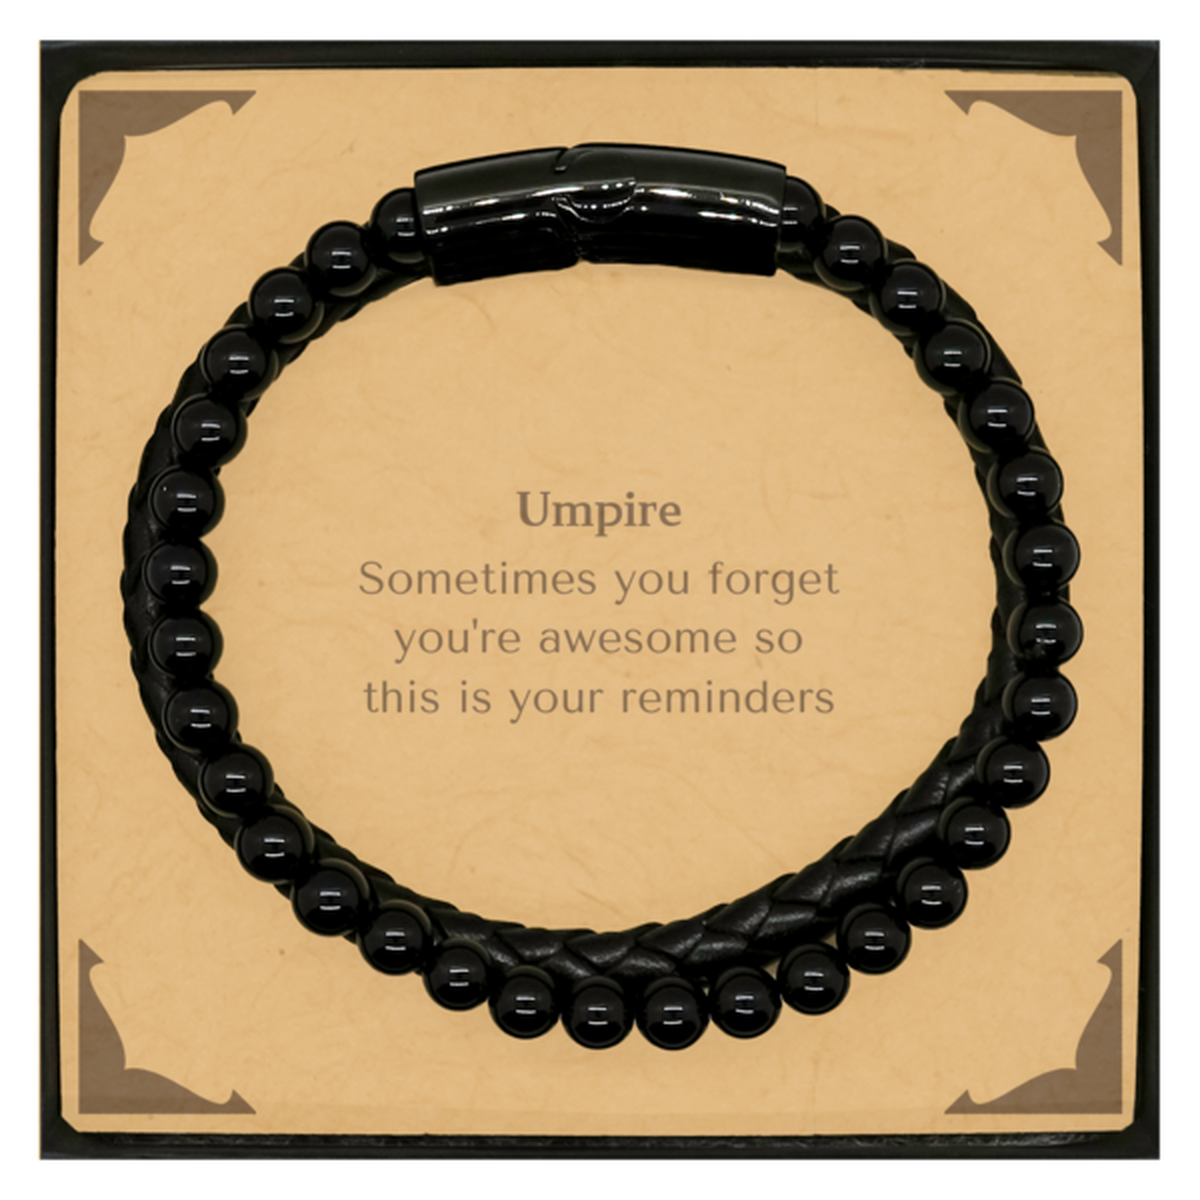 Sentimental Umpire Stone Leather Bracelets, Umpire Sometimes you forget you're awesome so this is your reminders, Graduation Christmas Birthday Gifts for Umpire, Men, Women, Coworkers